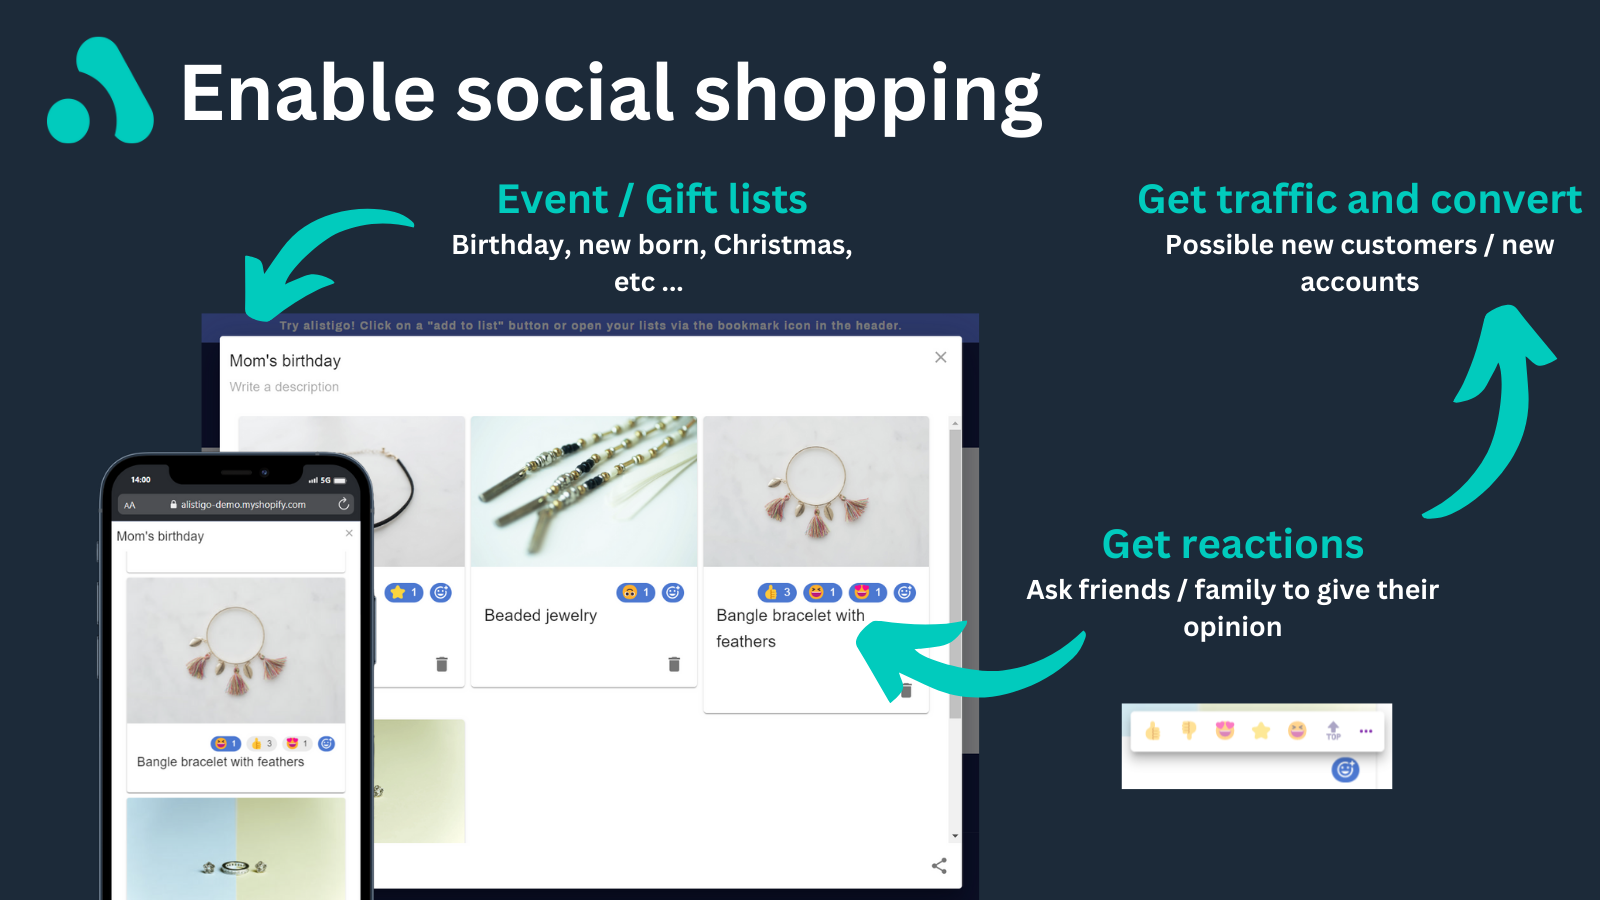 enable social shopping: event and gift lists. Get reactions.